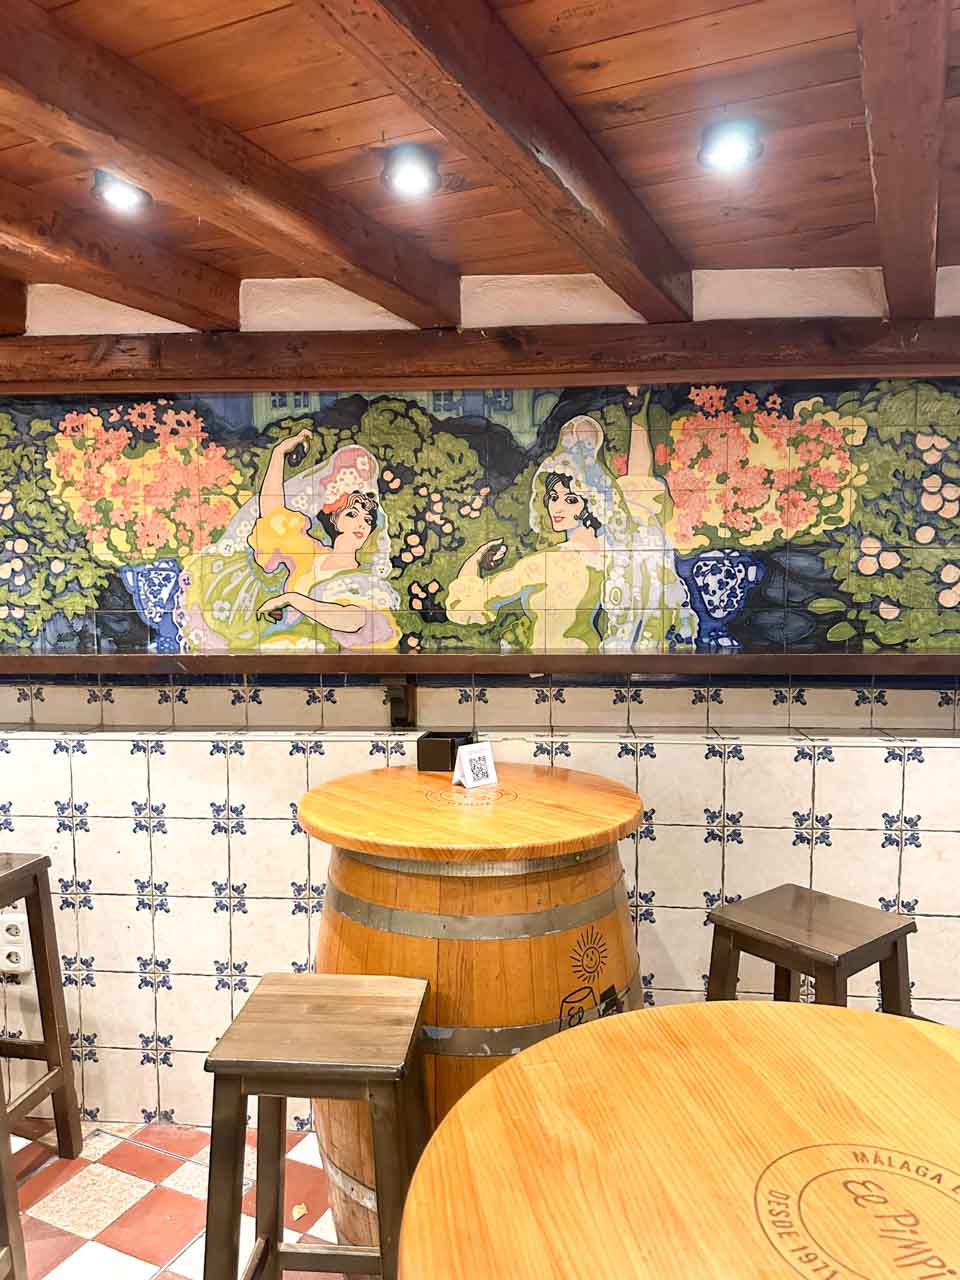 The interior of Bodega El Pimpi in Malaga, Spain, with a decorative tile mural on the wall and wooden barrels as tables